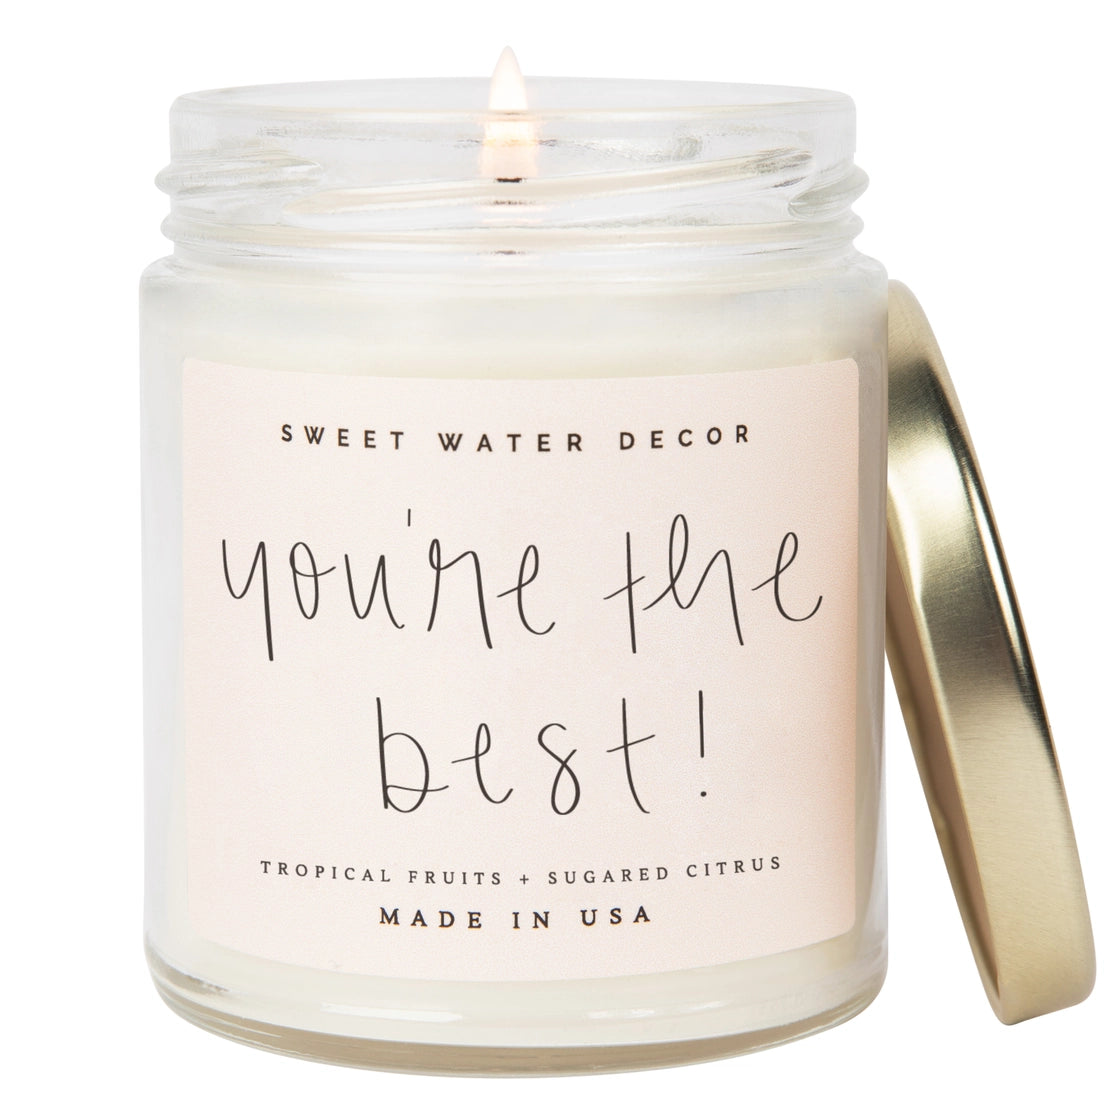 You're The Best Soy Candle